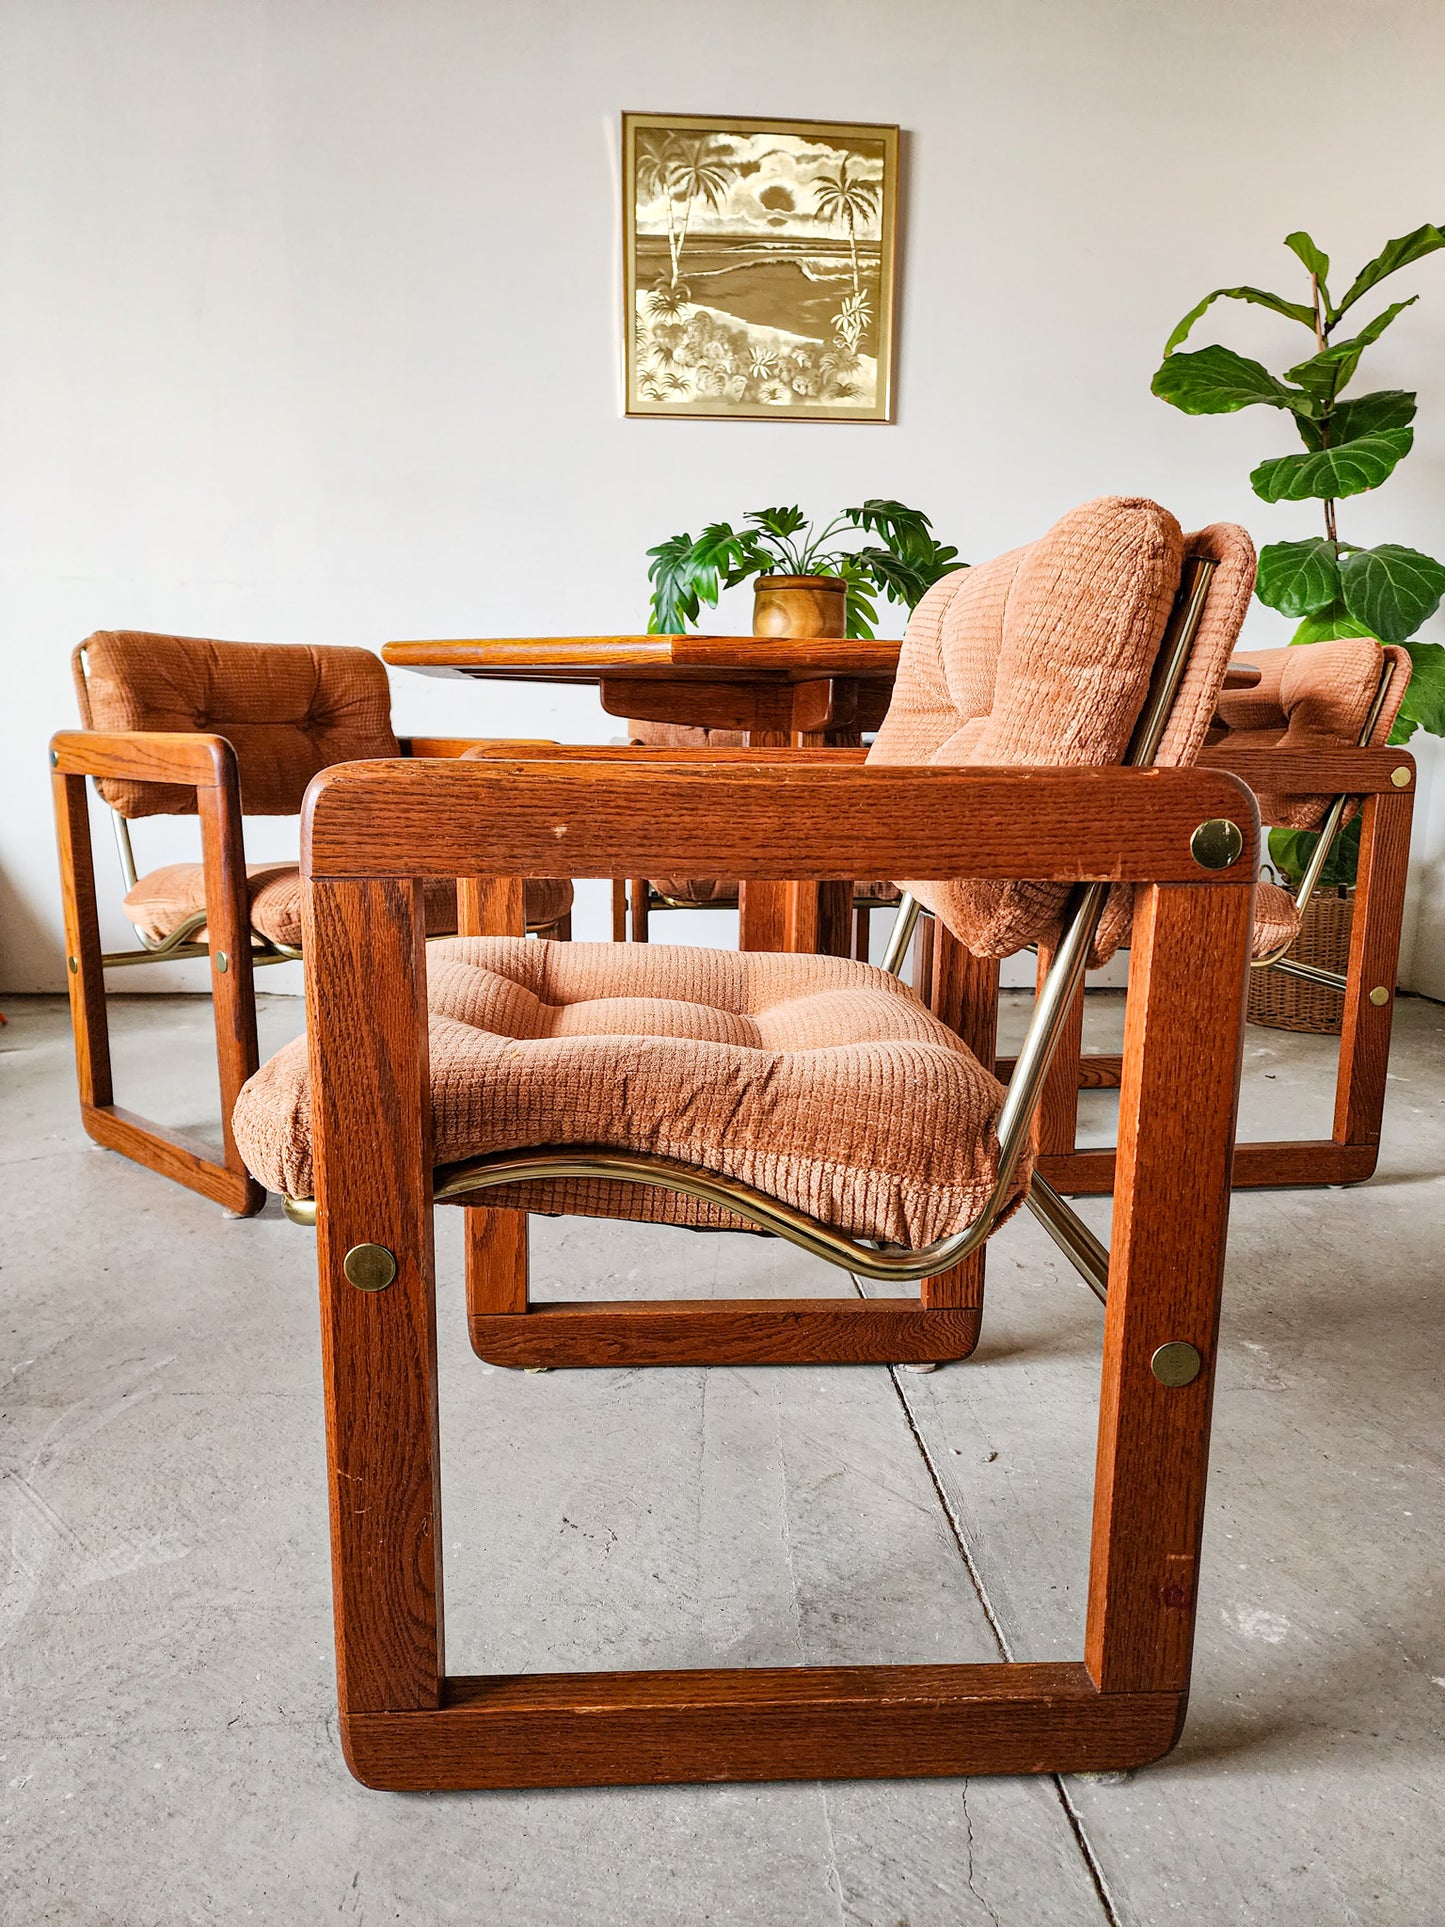 Beautiful Mid Century Dining Table & Chairs - Reclaimed Mt. Goods